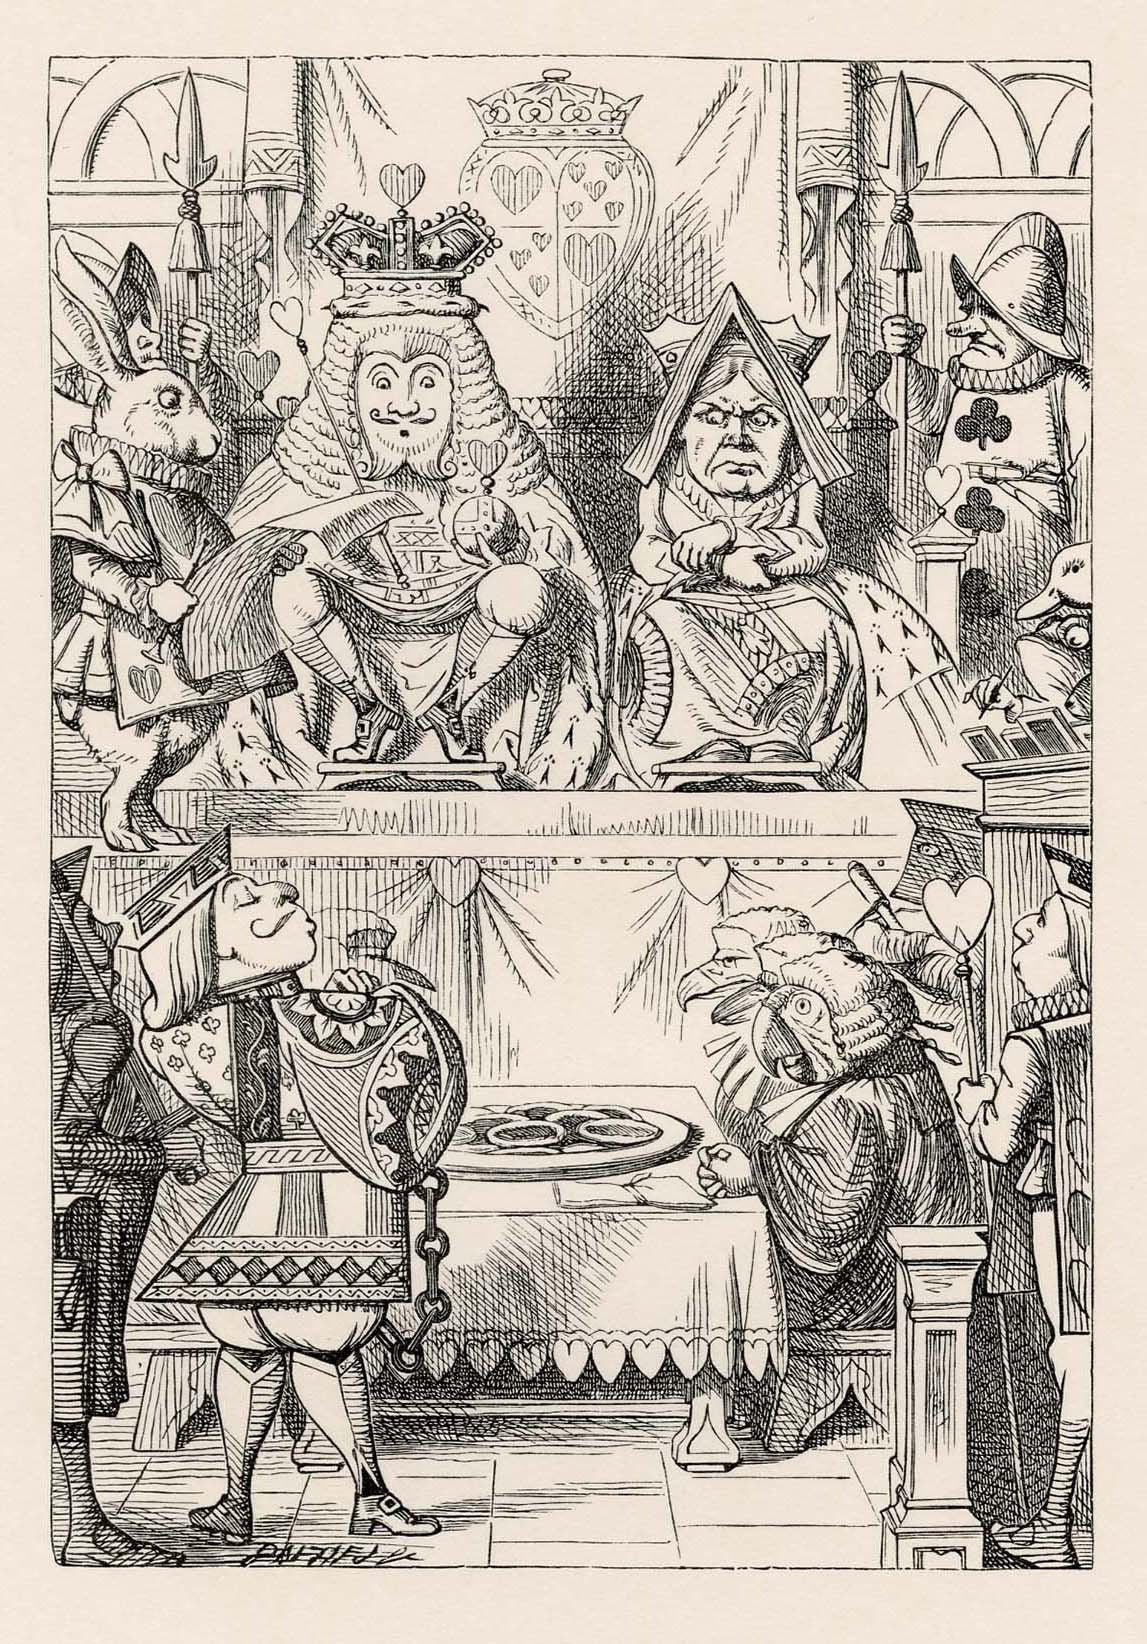 John Tenniel, The King and Queen of Hearts were seated on their throne..., woodcut